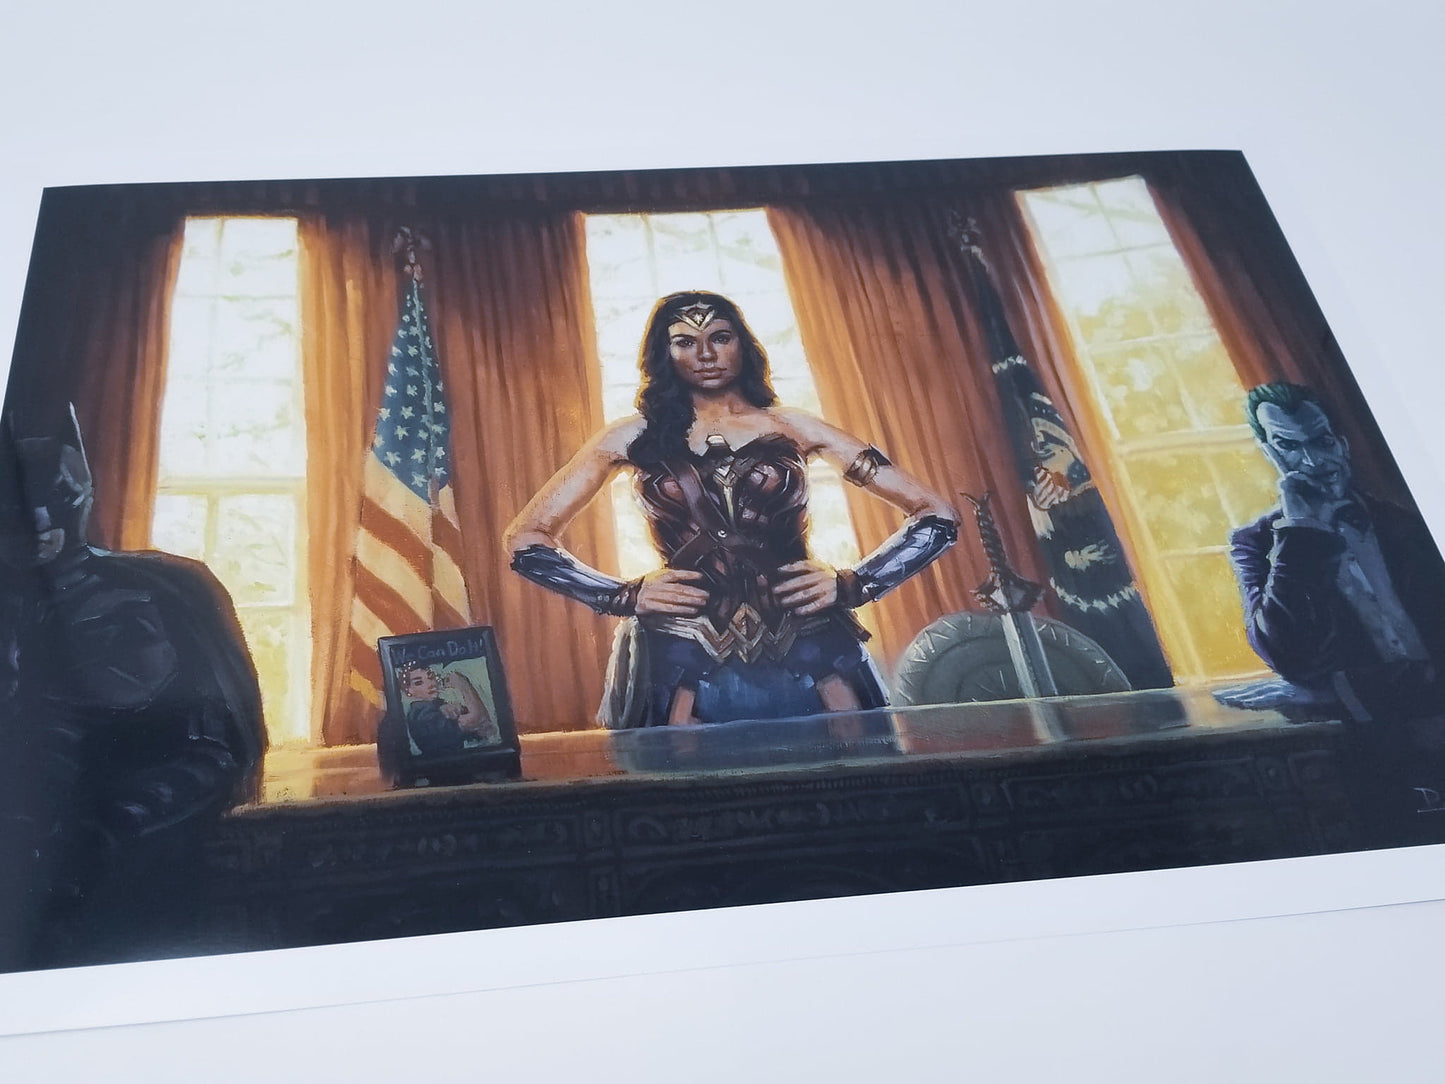 Load image into Gallery viewer, Wonder Woman in the Oval Office Art Print By Bucket Art  What if Diana Prince were Madam President of the USA? Wonder Woman stands at the Resolute Desk in the Oval Office, continuing to fight for truth, love, and justice.  Wonder Woman wears her iconic armor. Batman and The Joker are seated on each side of her desk symbolizing bipartisanship. Look for the &amp;quot;We Can Do It&amp;quot; framed image on her desk. Wonder Woman’s shield and the Godkiller sword are behind her.
